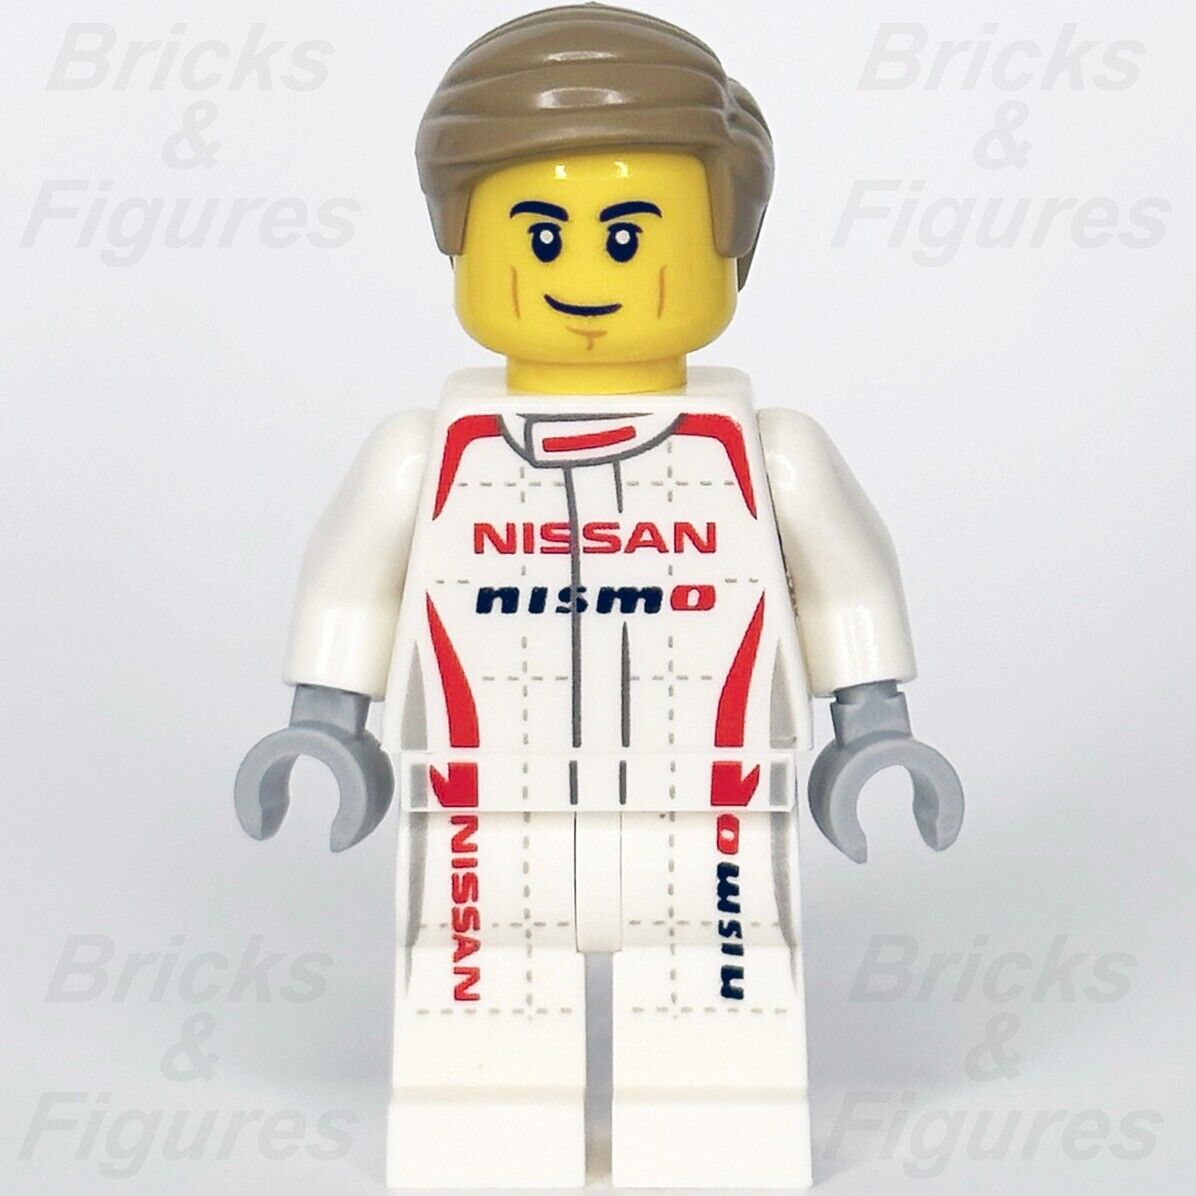 LEGO Speed Champions Nissan GT-R NISMO Driver Minifigure Racing 76896 sc081 2